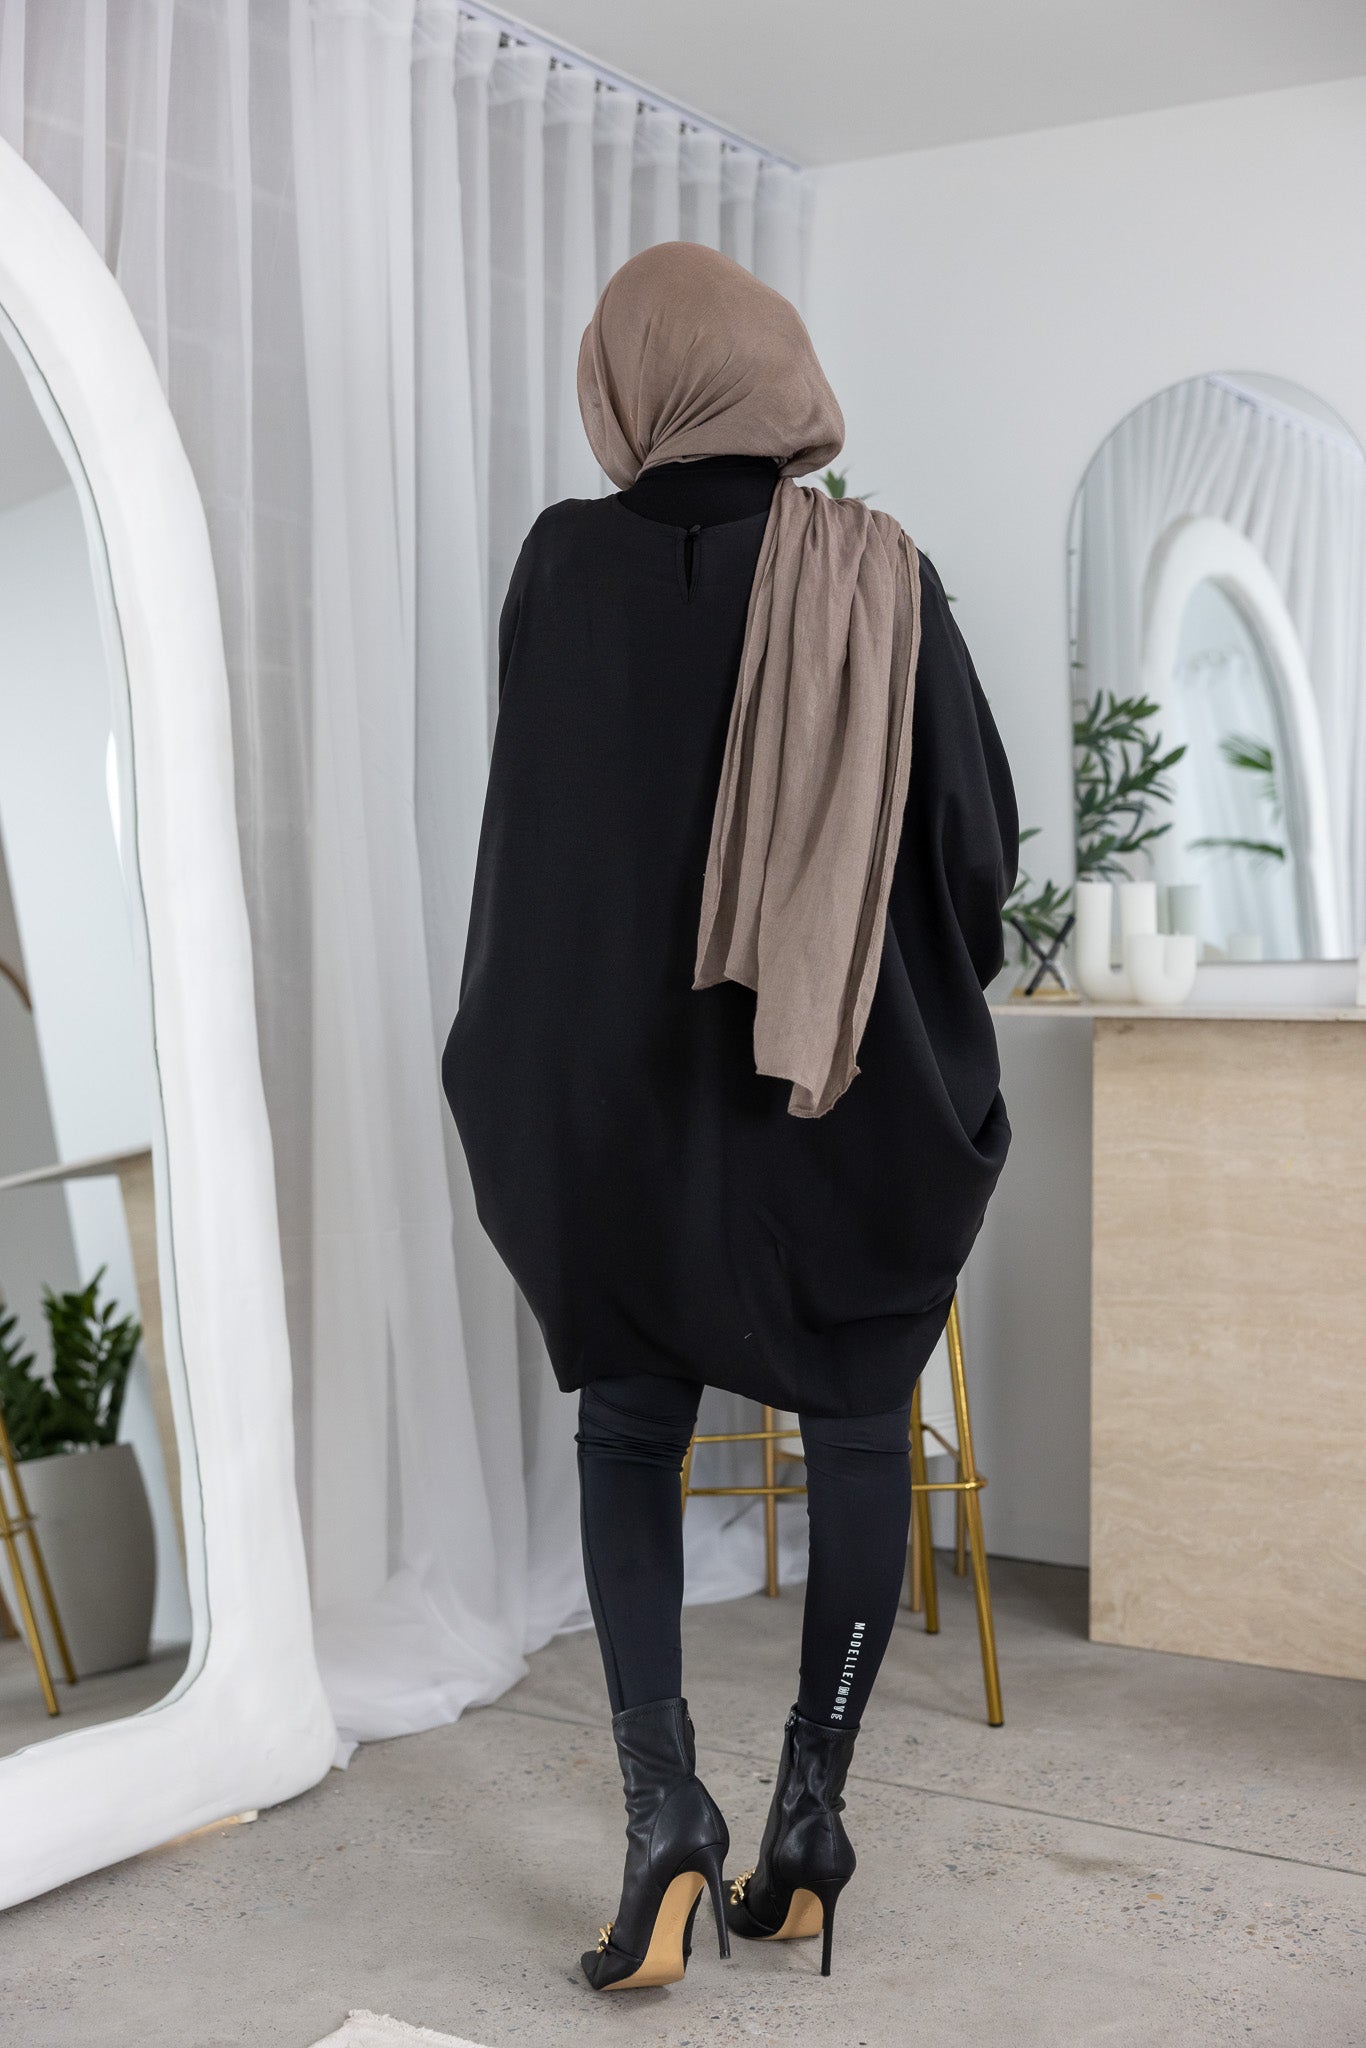 The Crescent Rumi Batwing Blouse